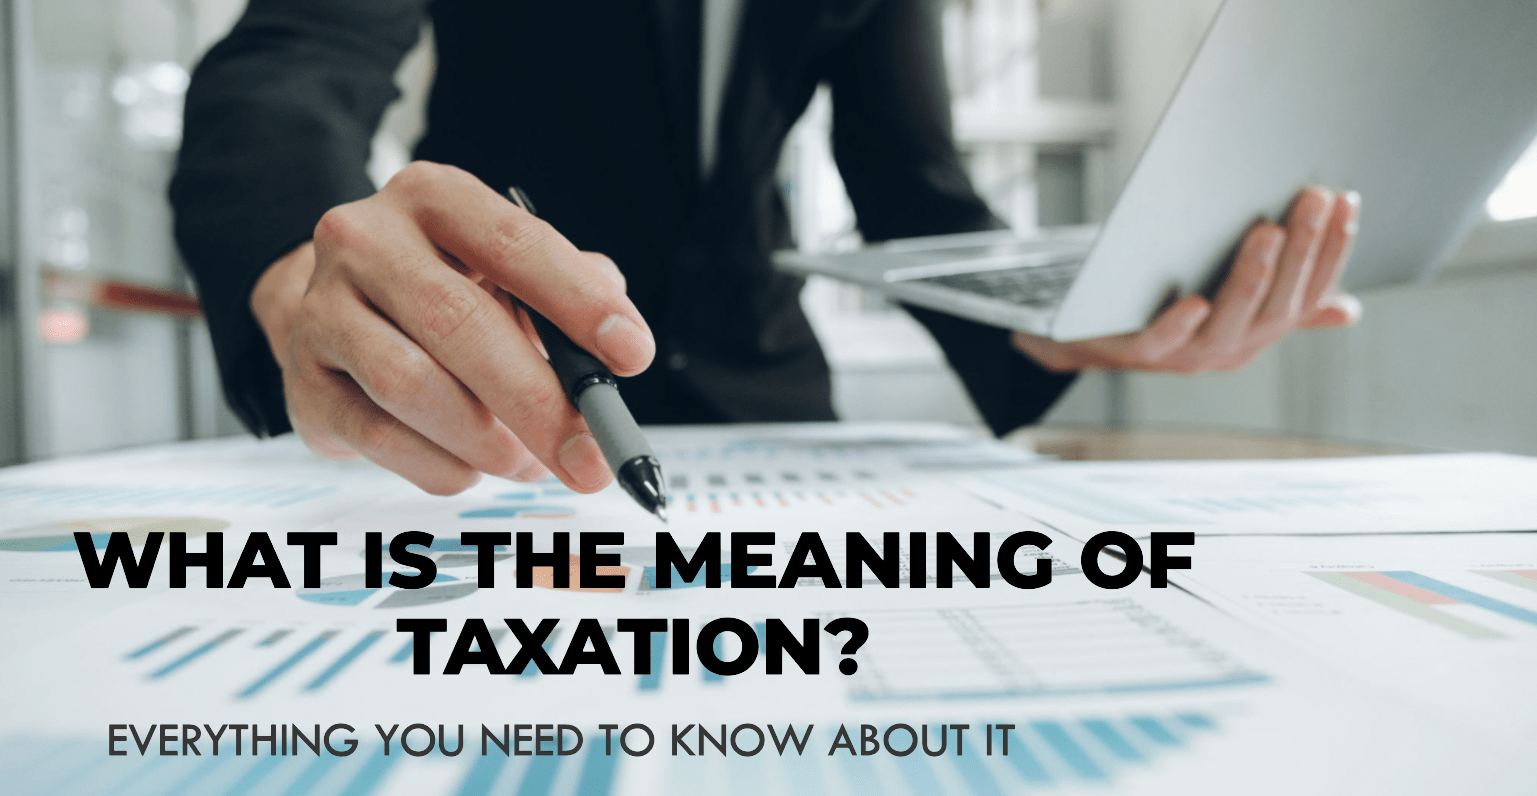 Taxation in the UAE